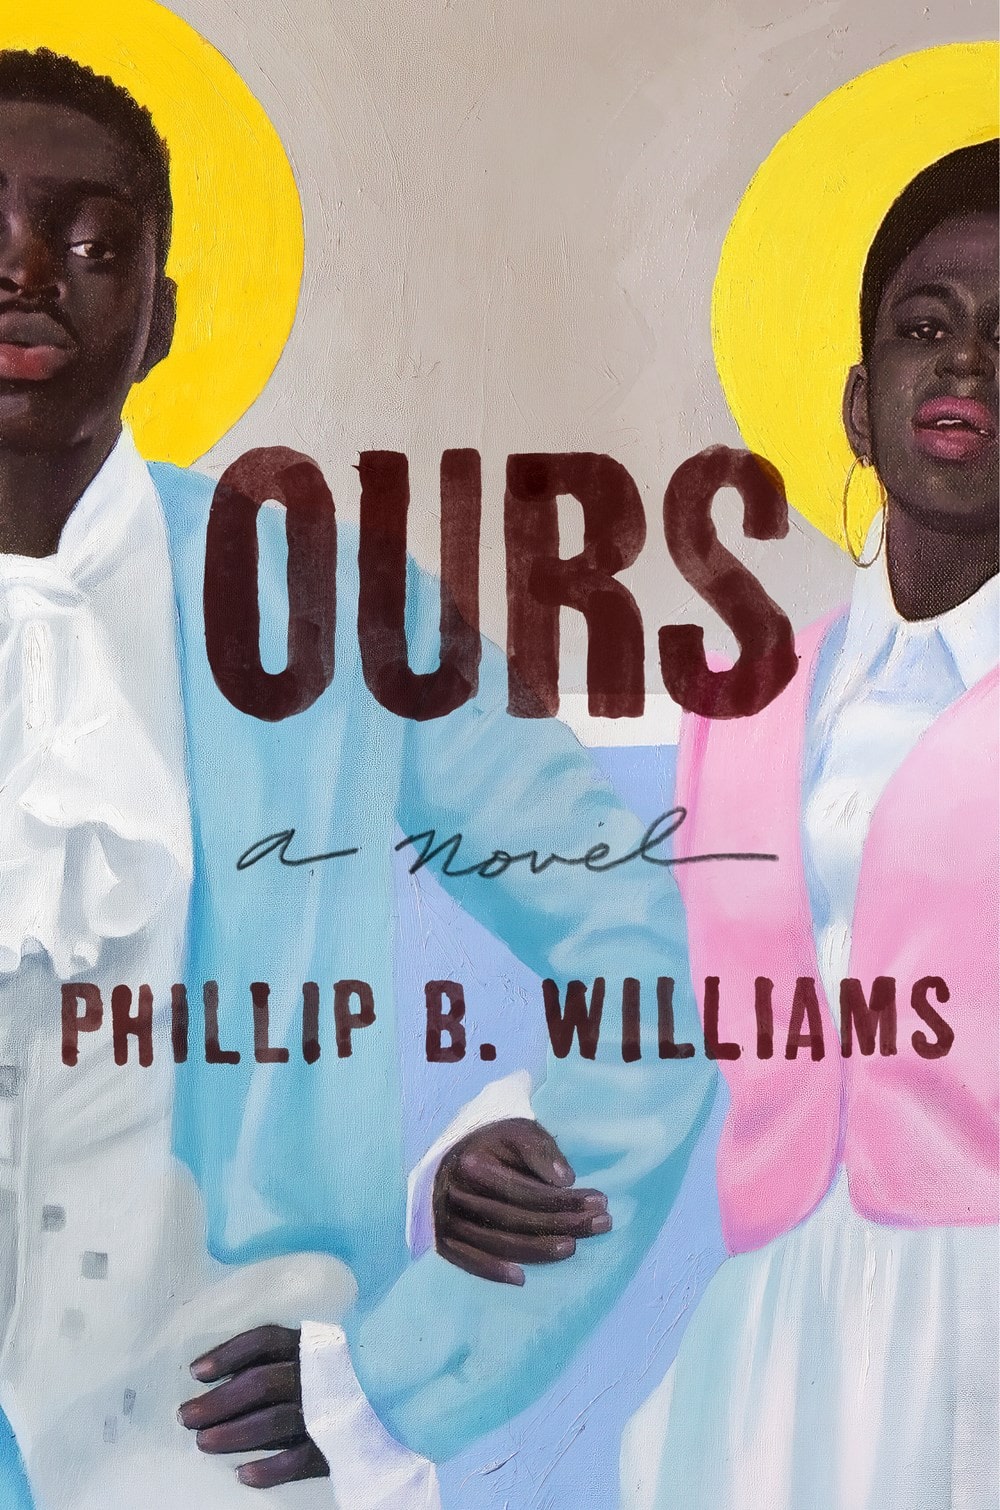 Ours-Phillip-B-Williams-book-cover